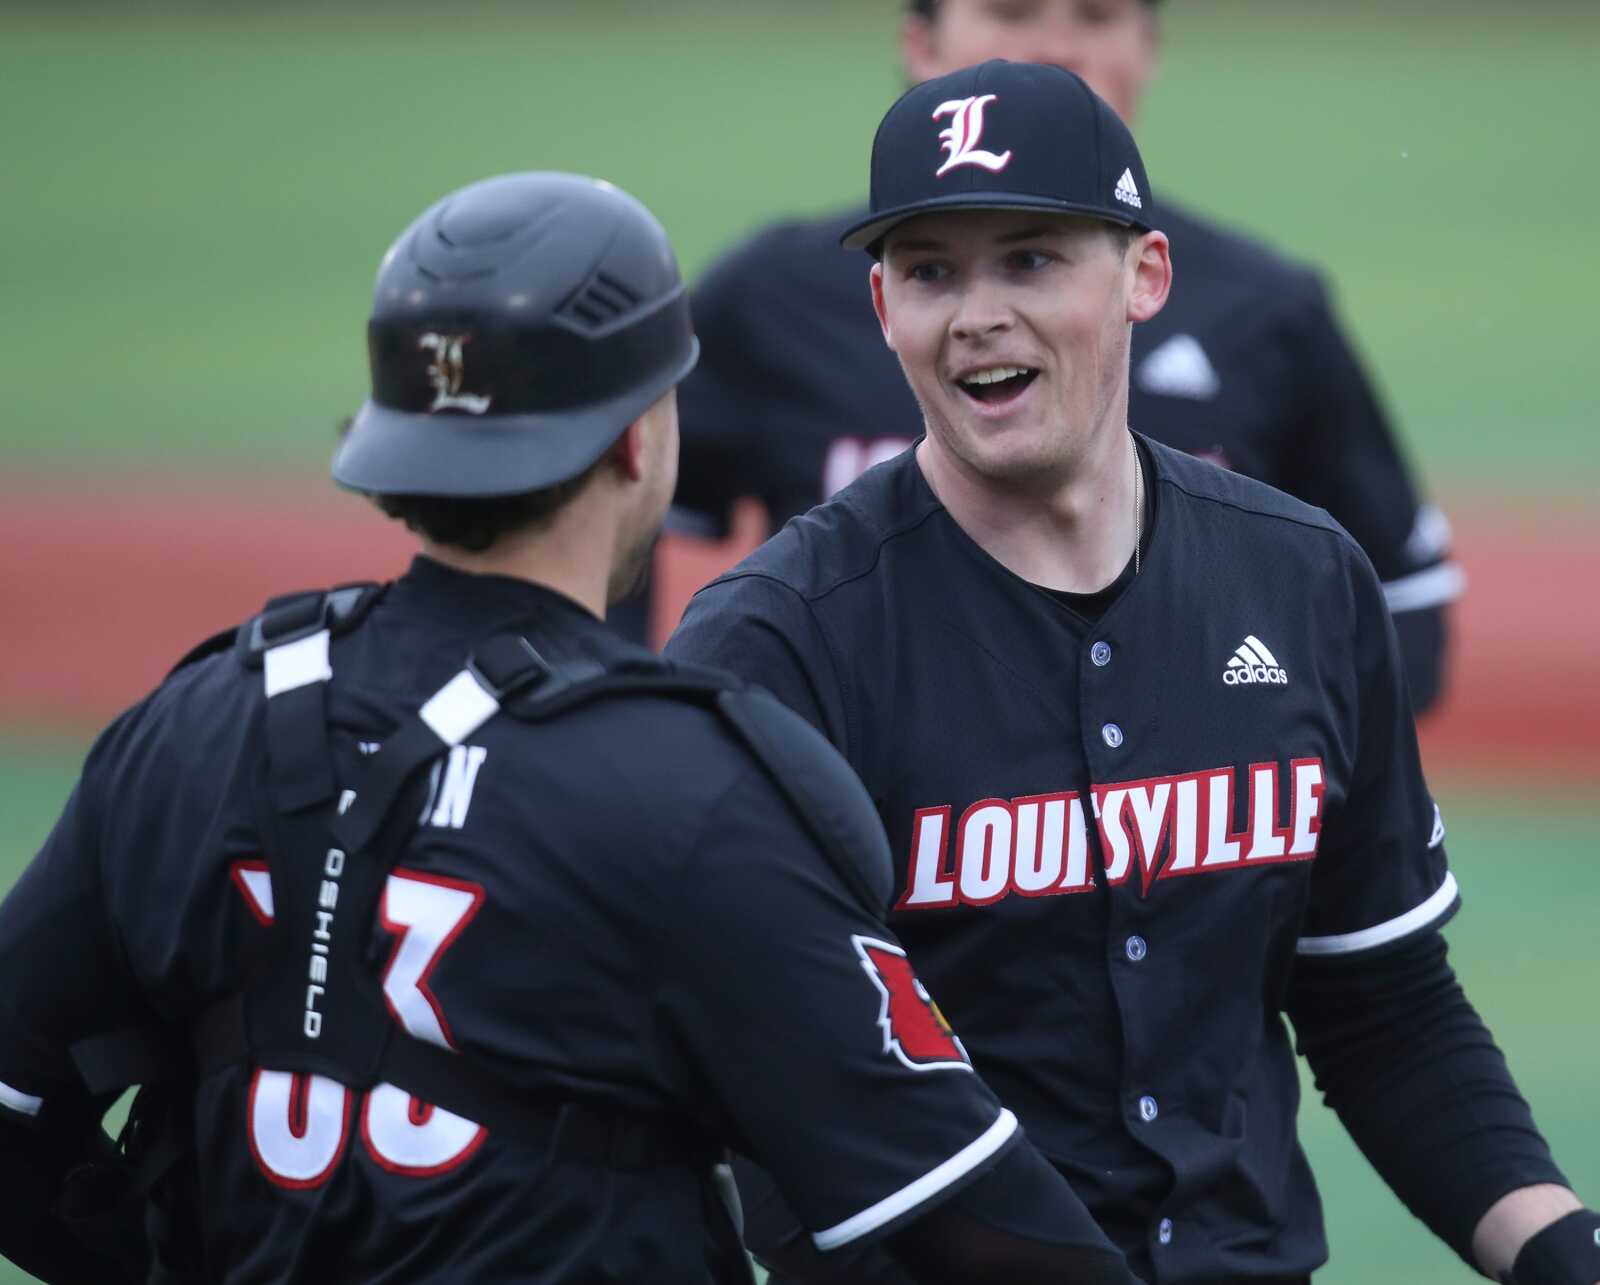 Check out the University of Louisville's new baseball uniforms